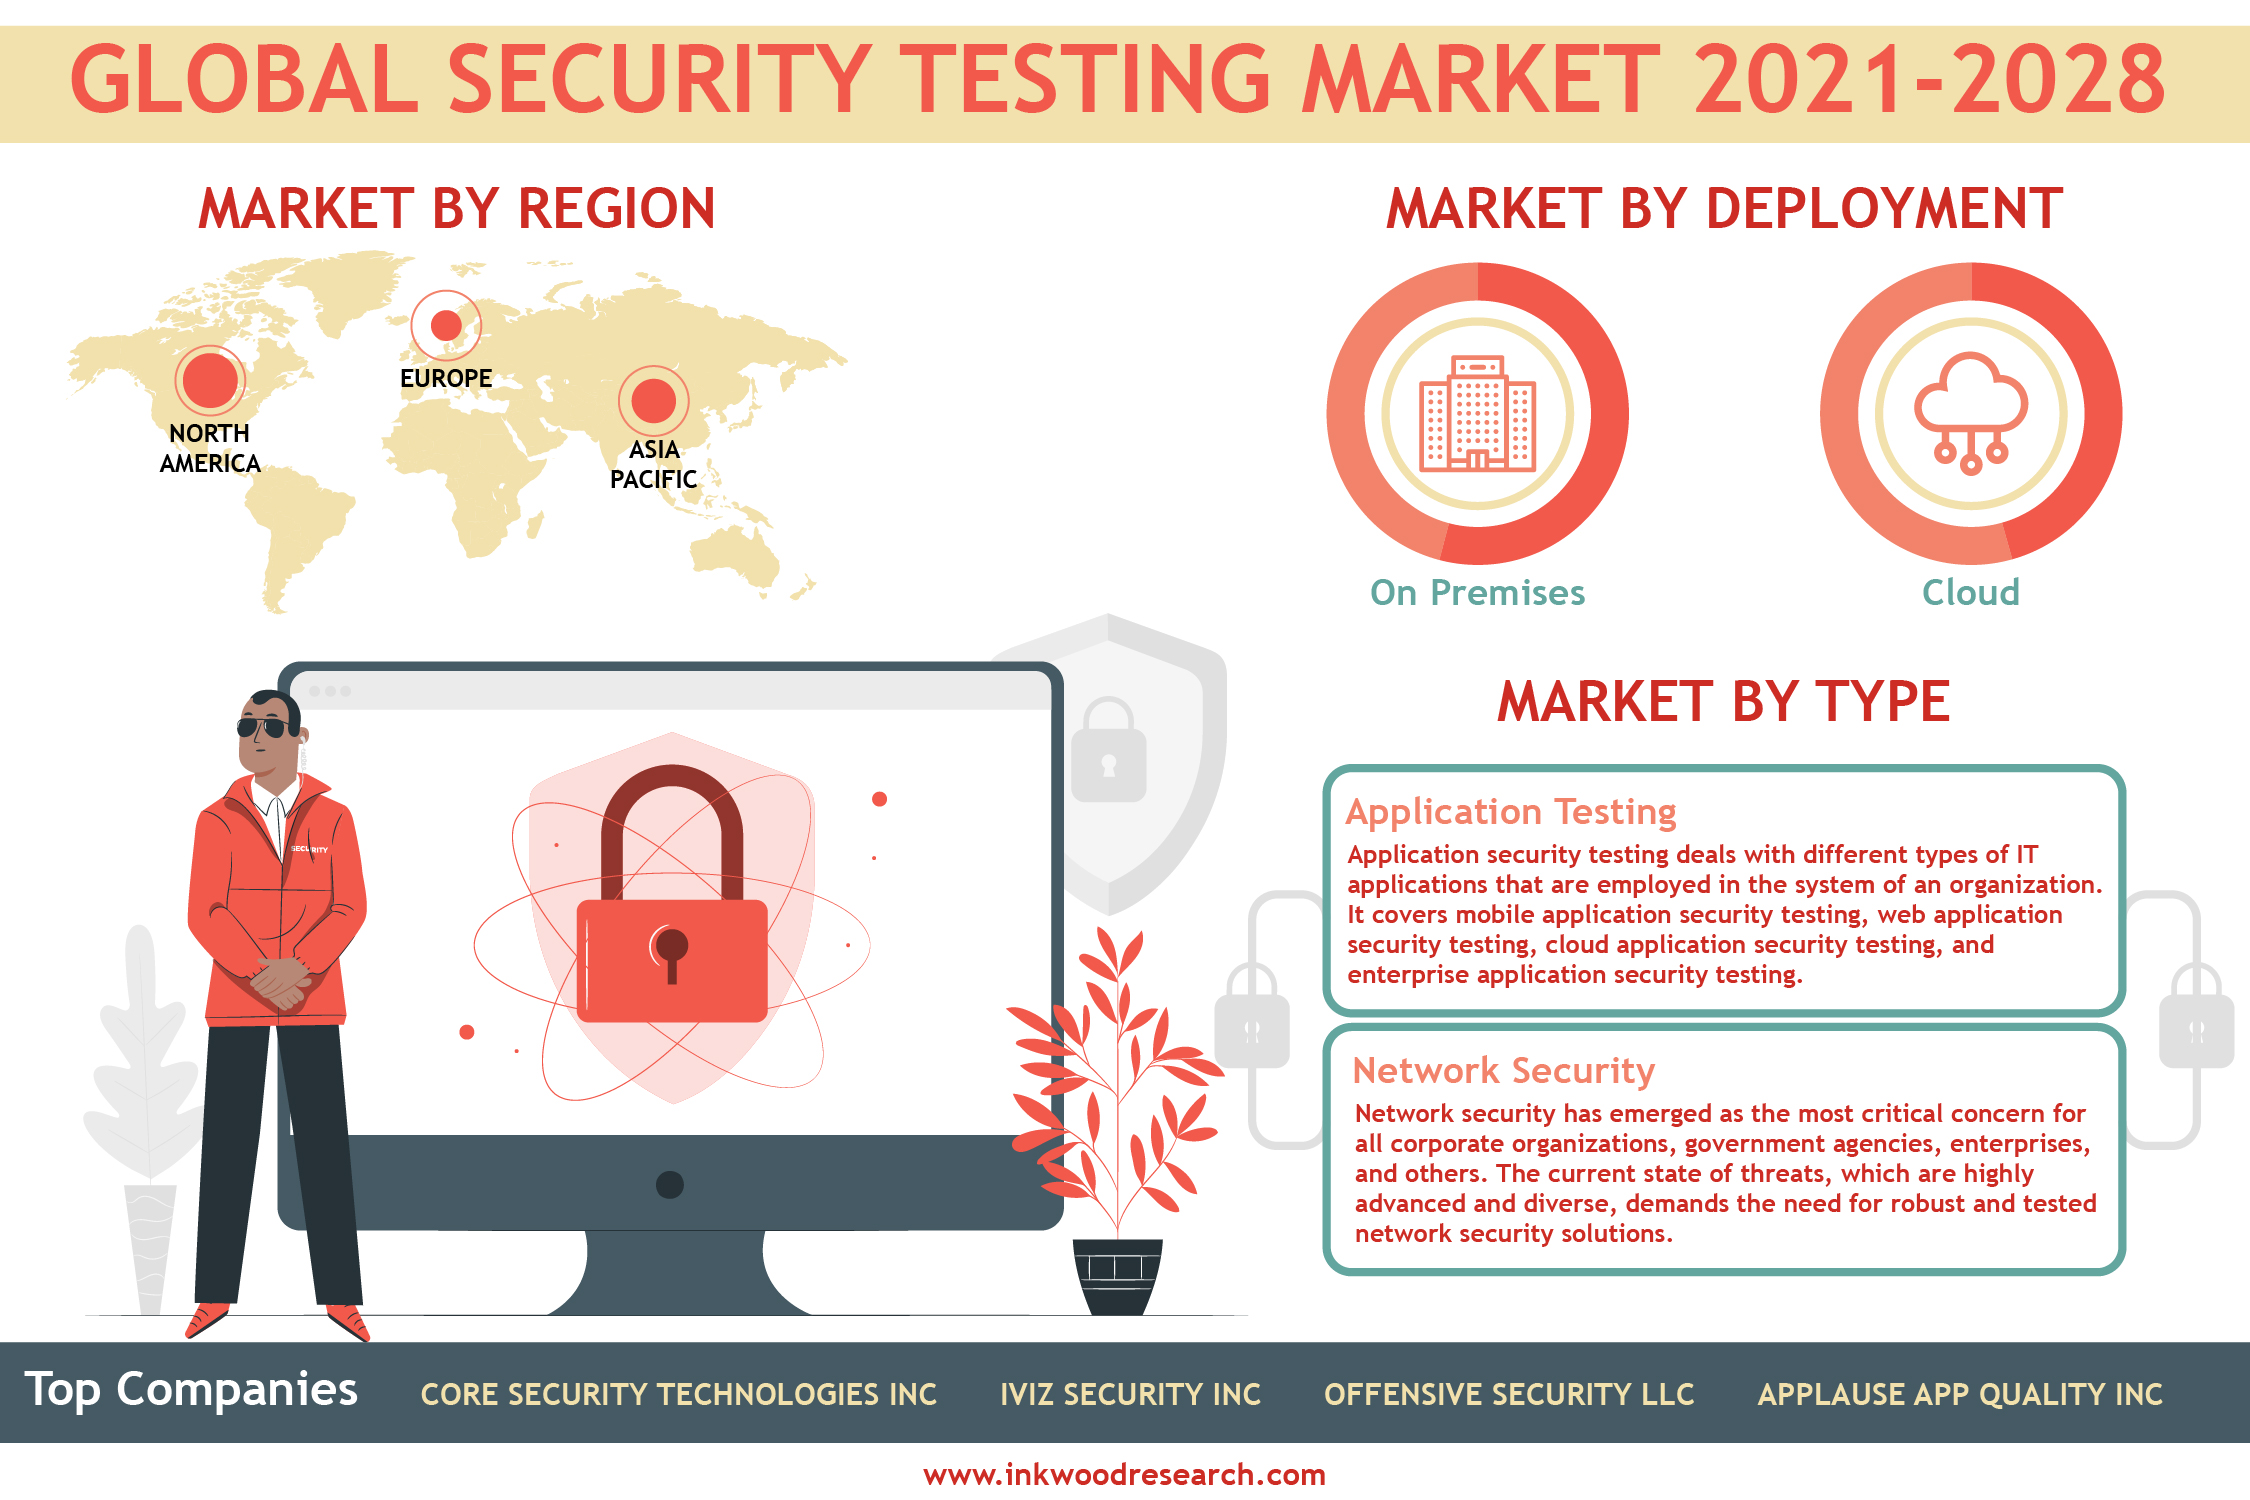 Growing Network Attacks to Propel the Global Security Testing Market 